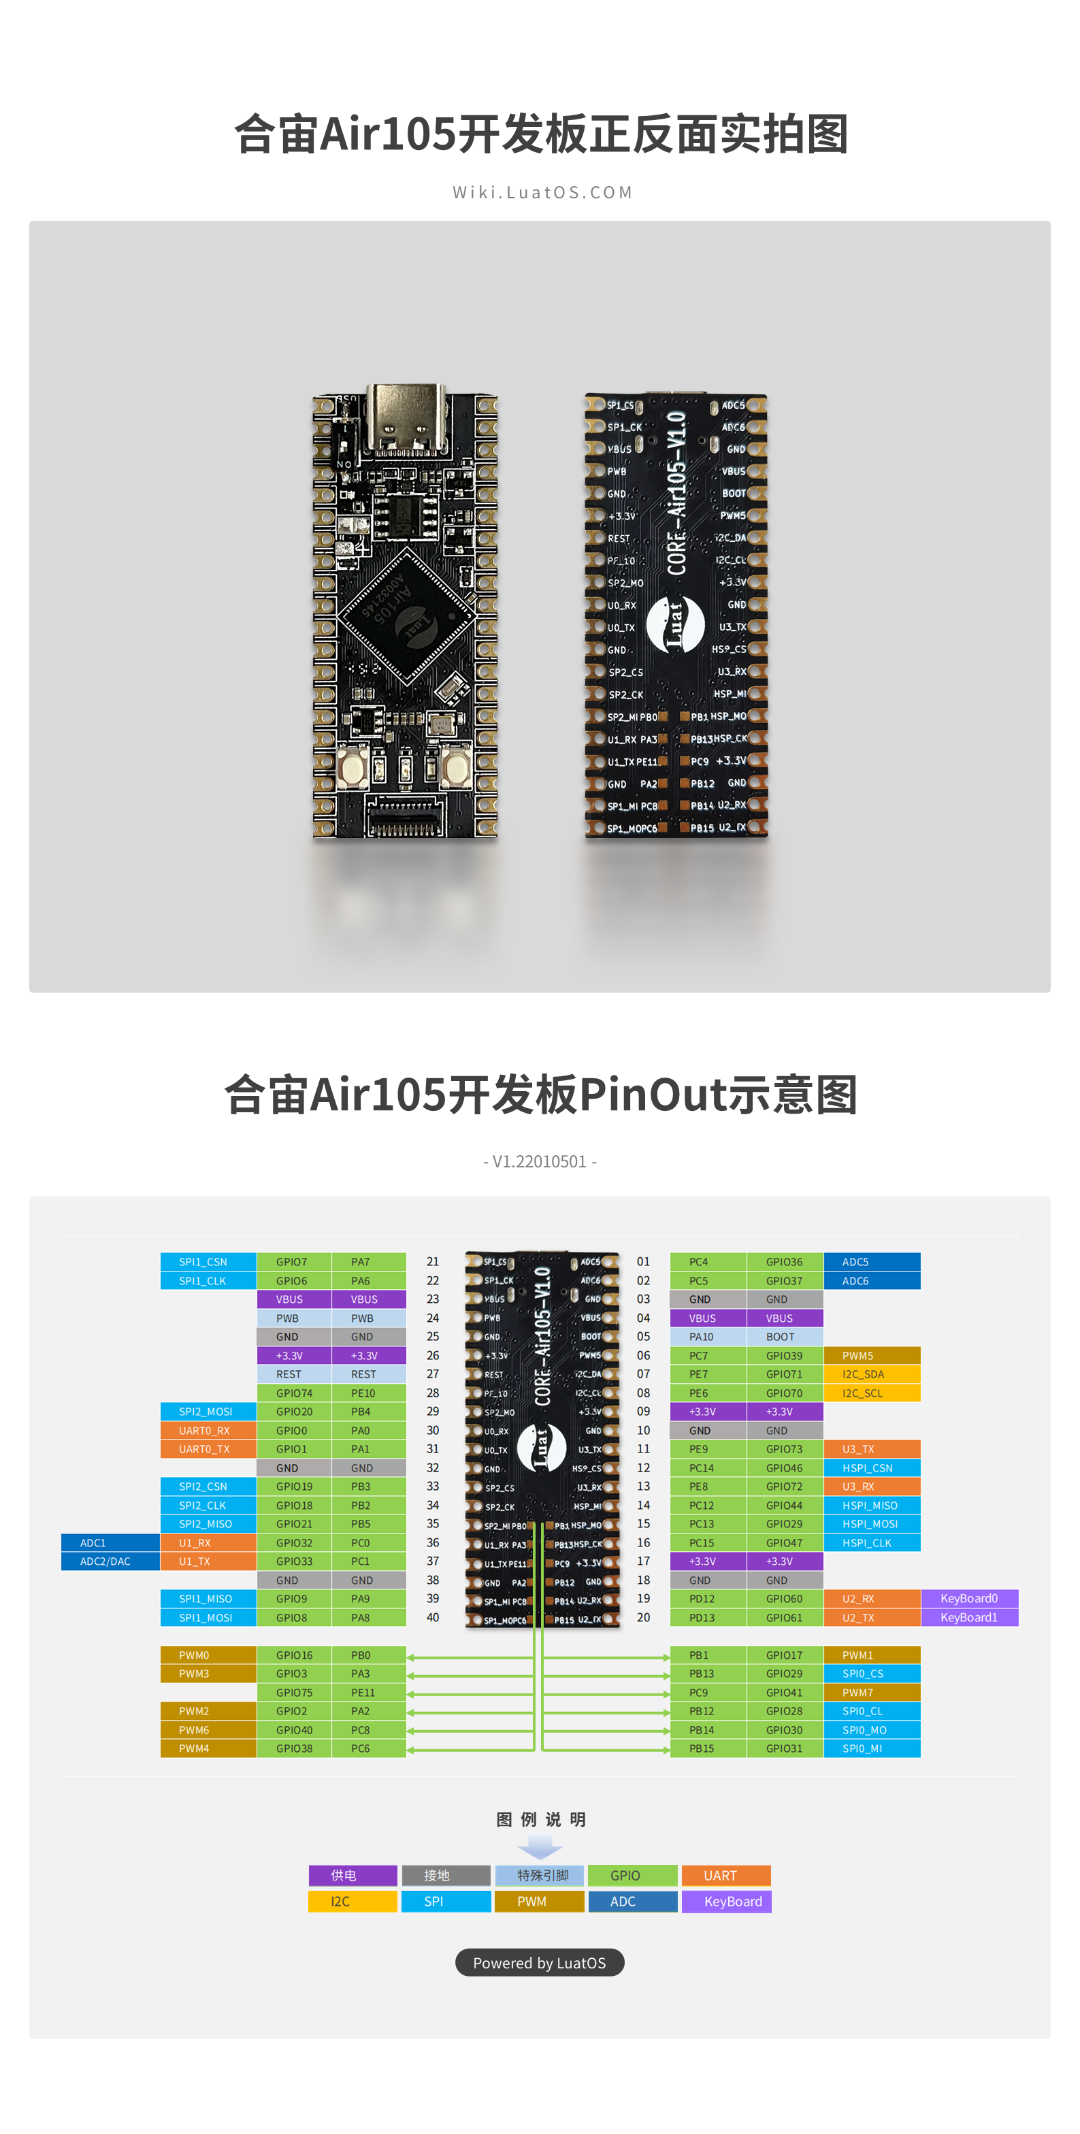 bsp/airm2m/air105/figures/board.png